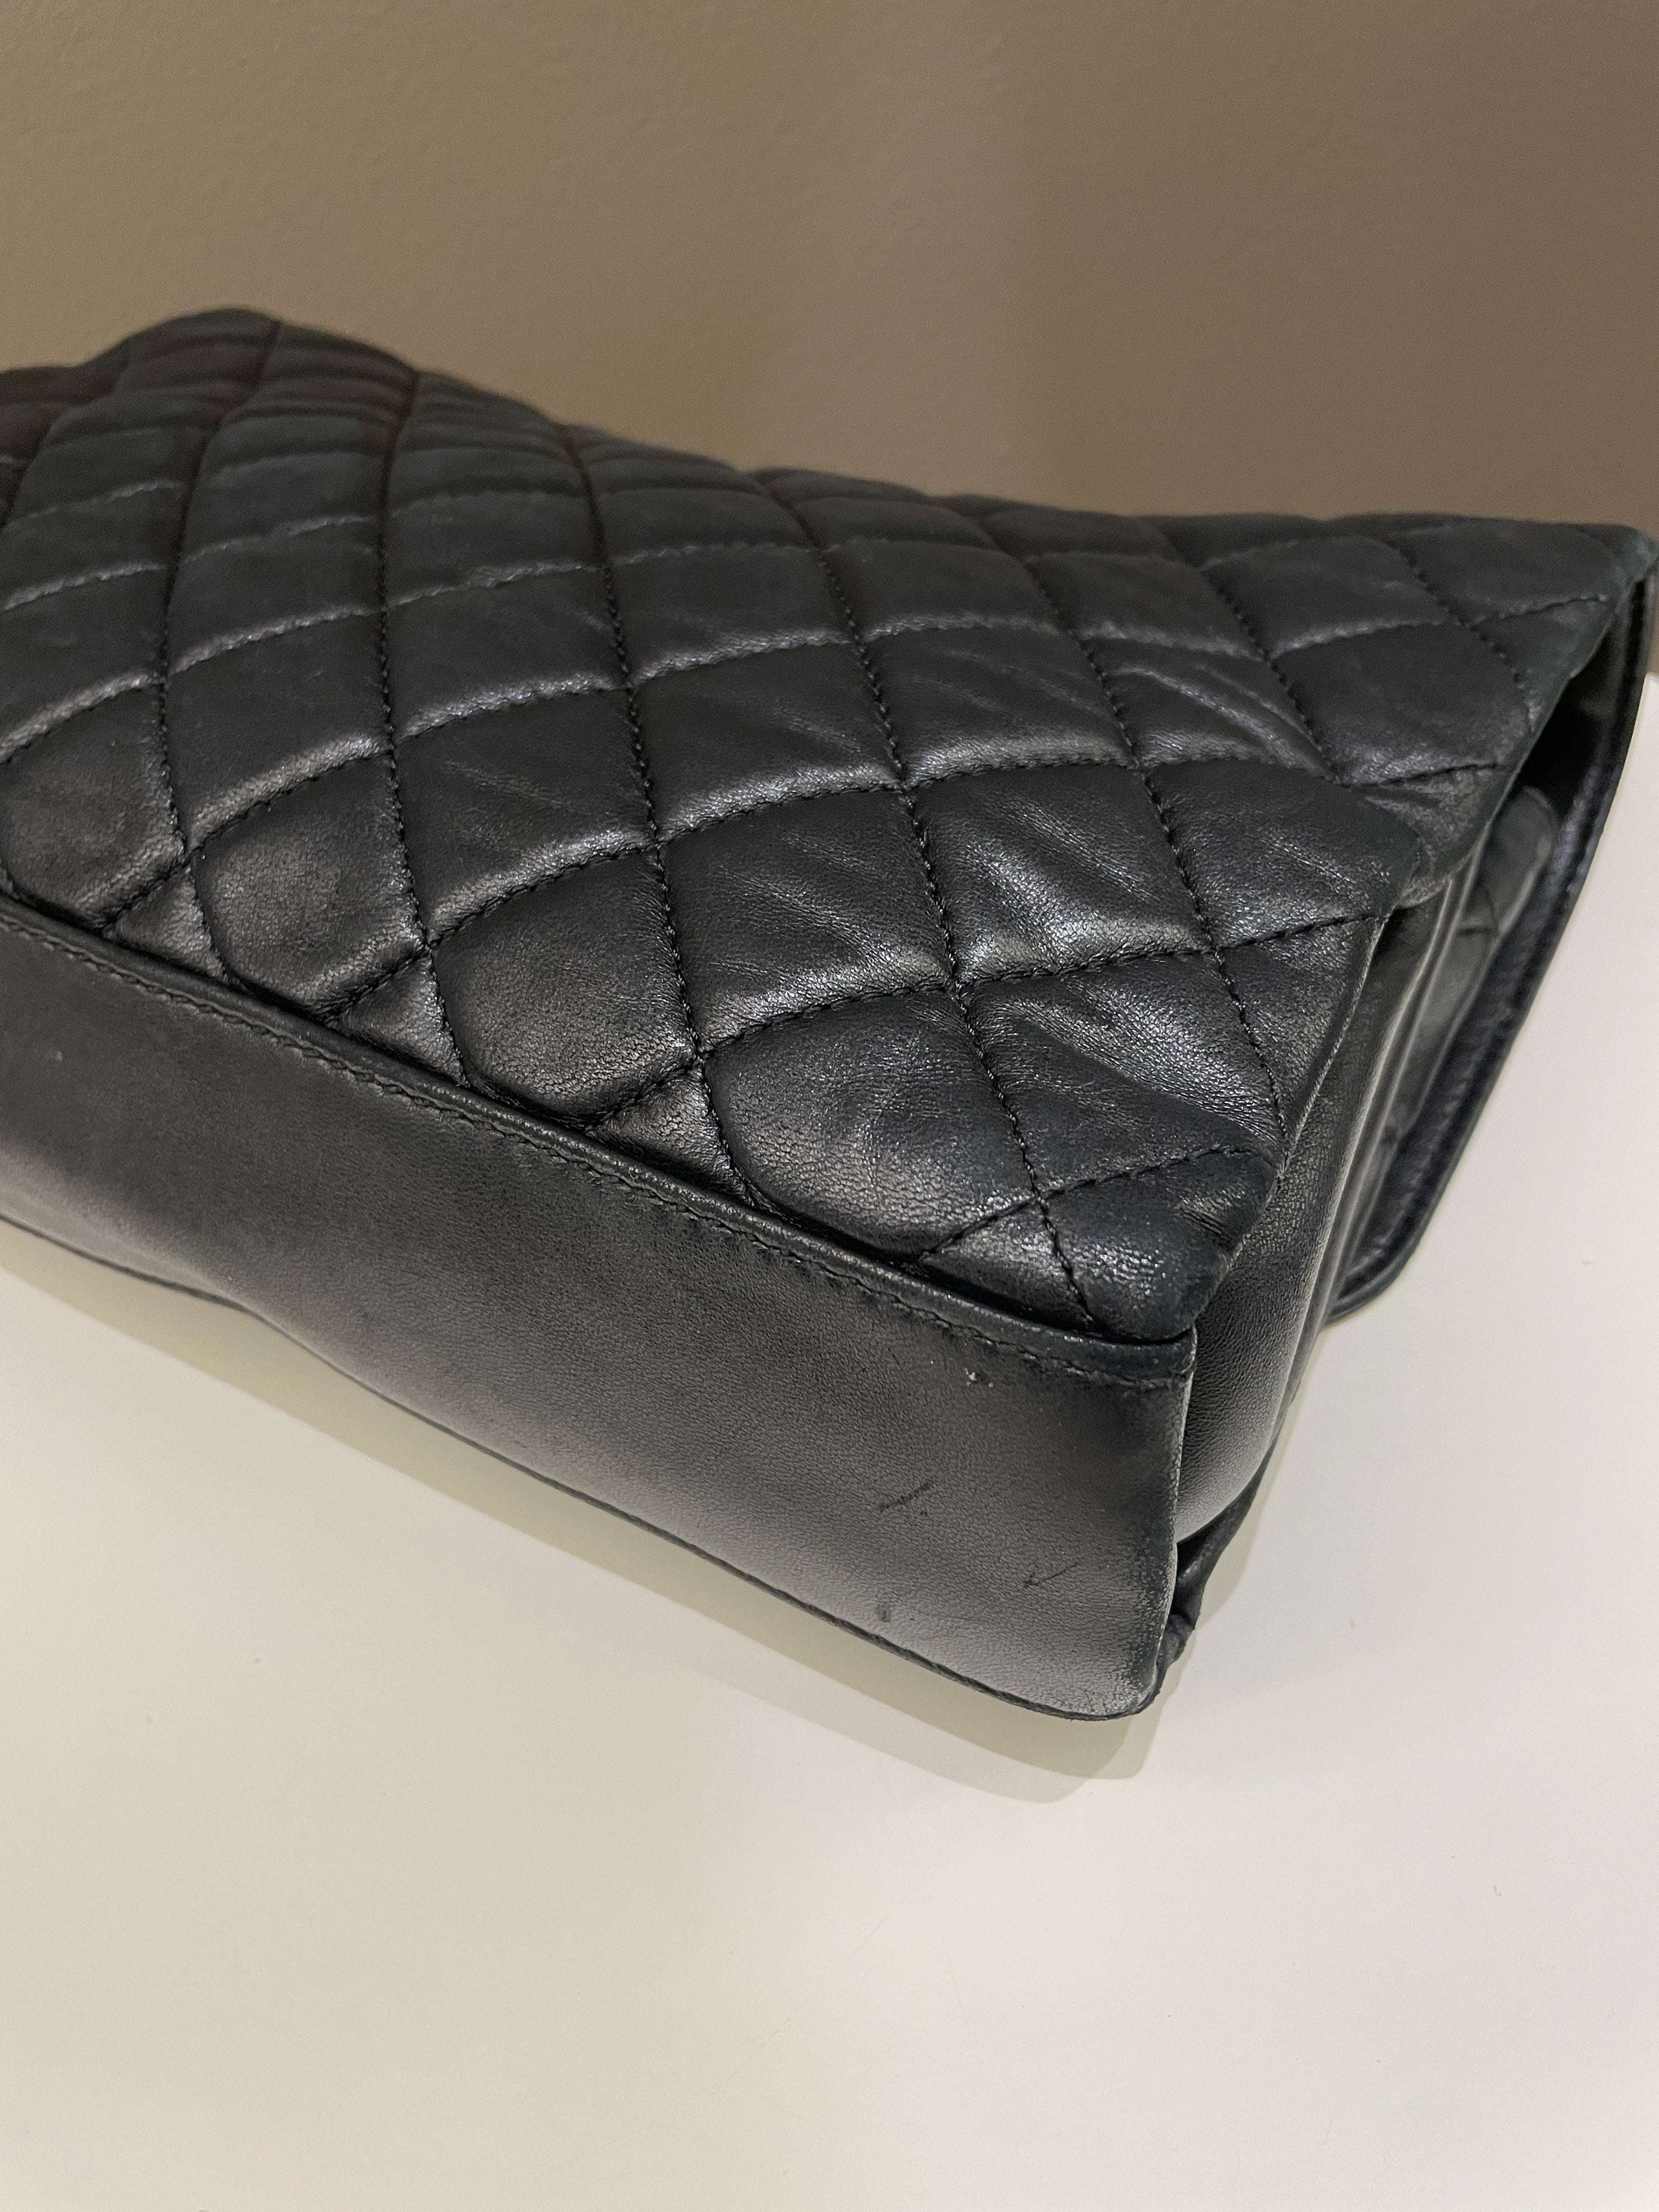 CHANEL Lambskin Quilted Small Coco Loop Tote Black 1150189